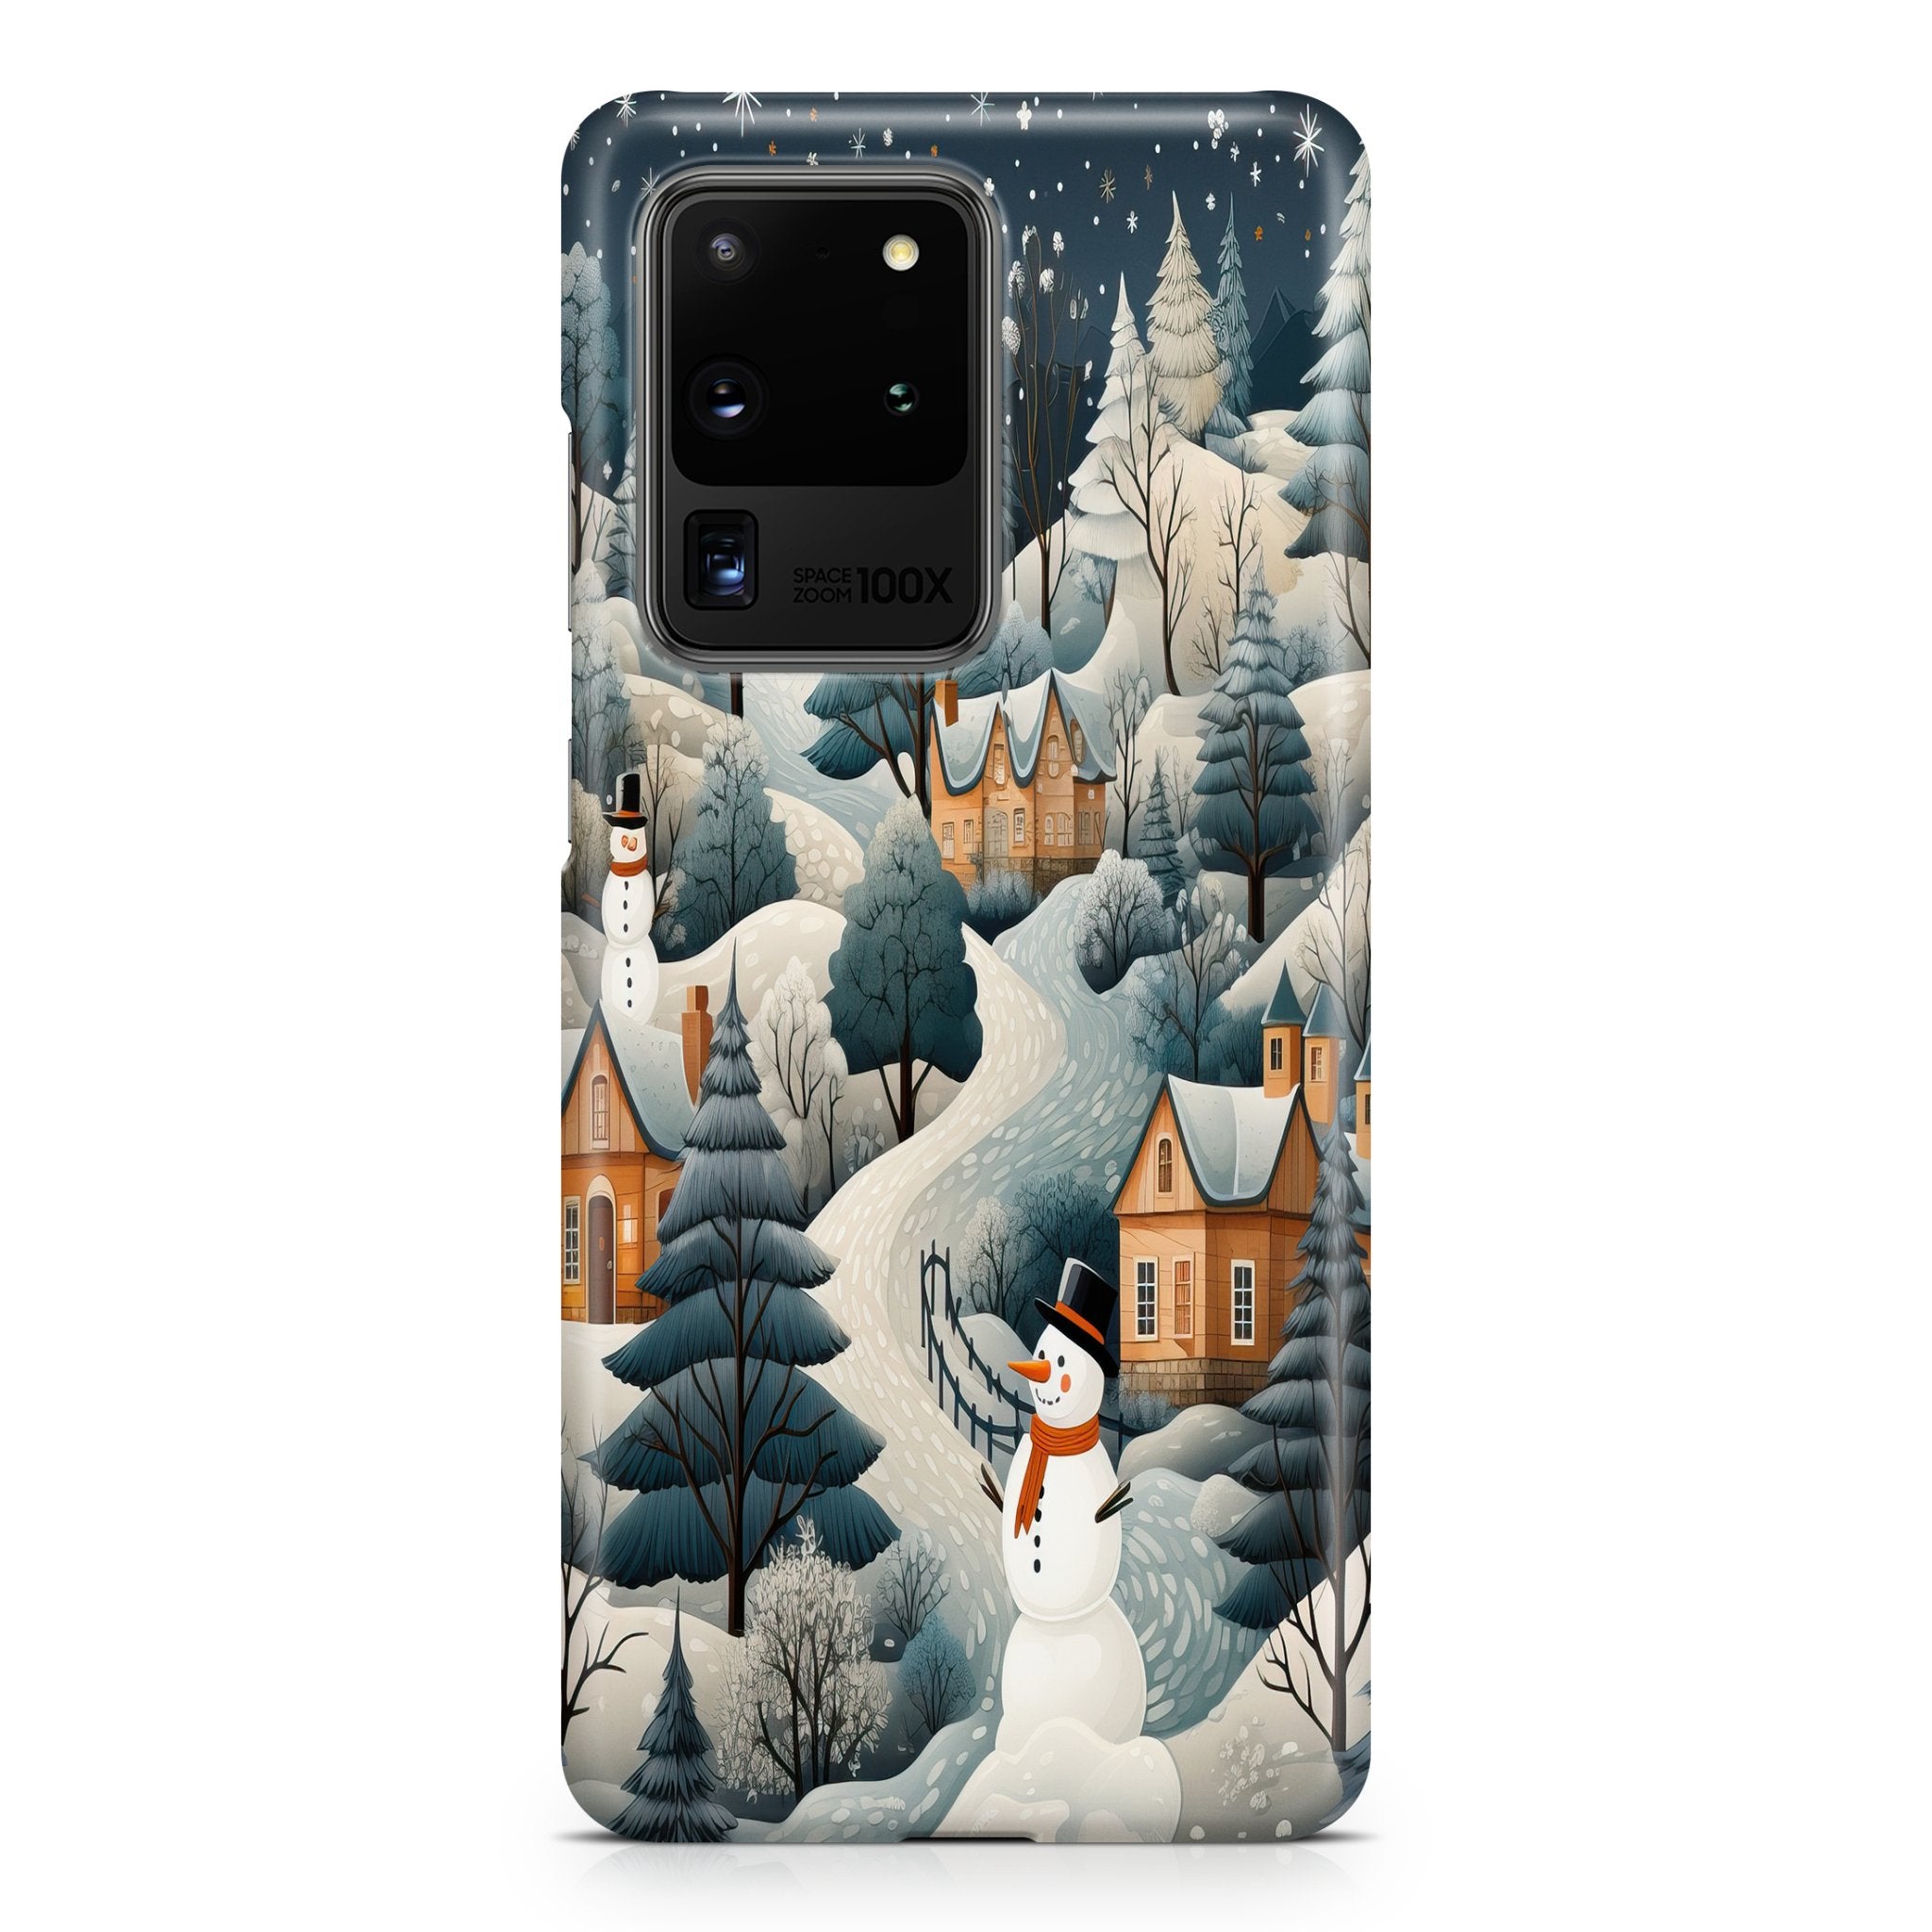 Winter Night - Samsung phone case designs by CaseSwagger